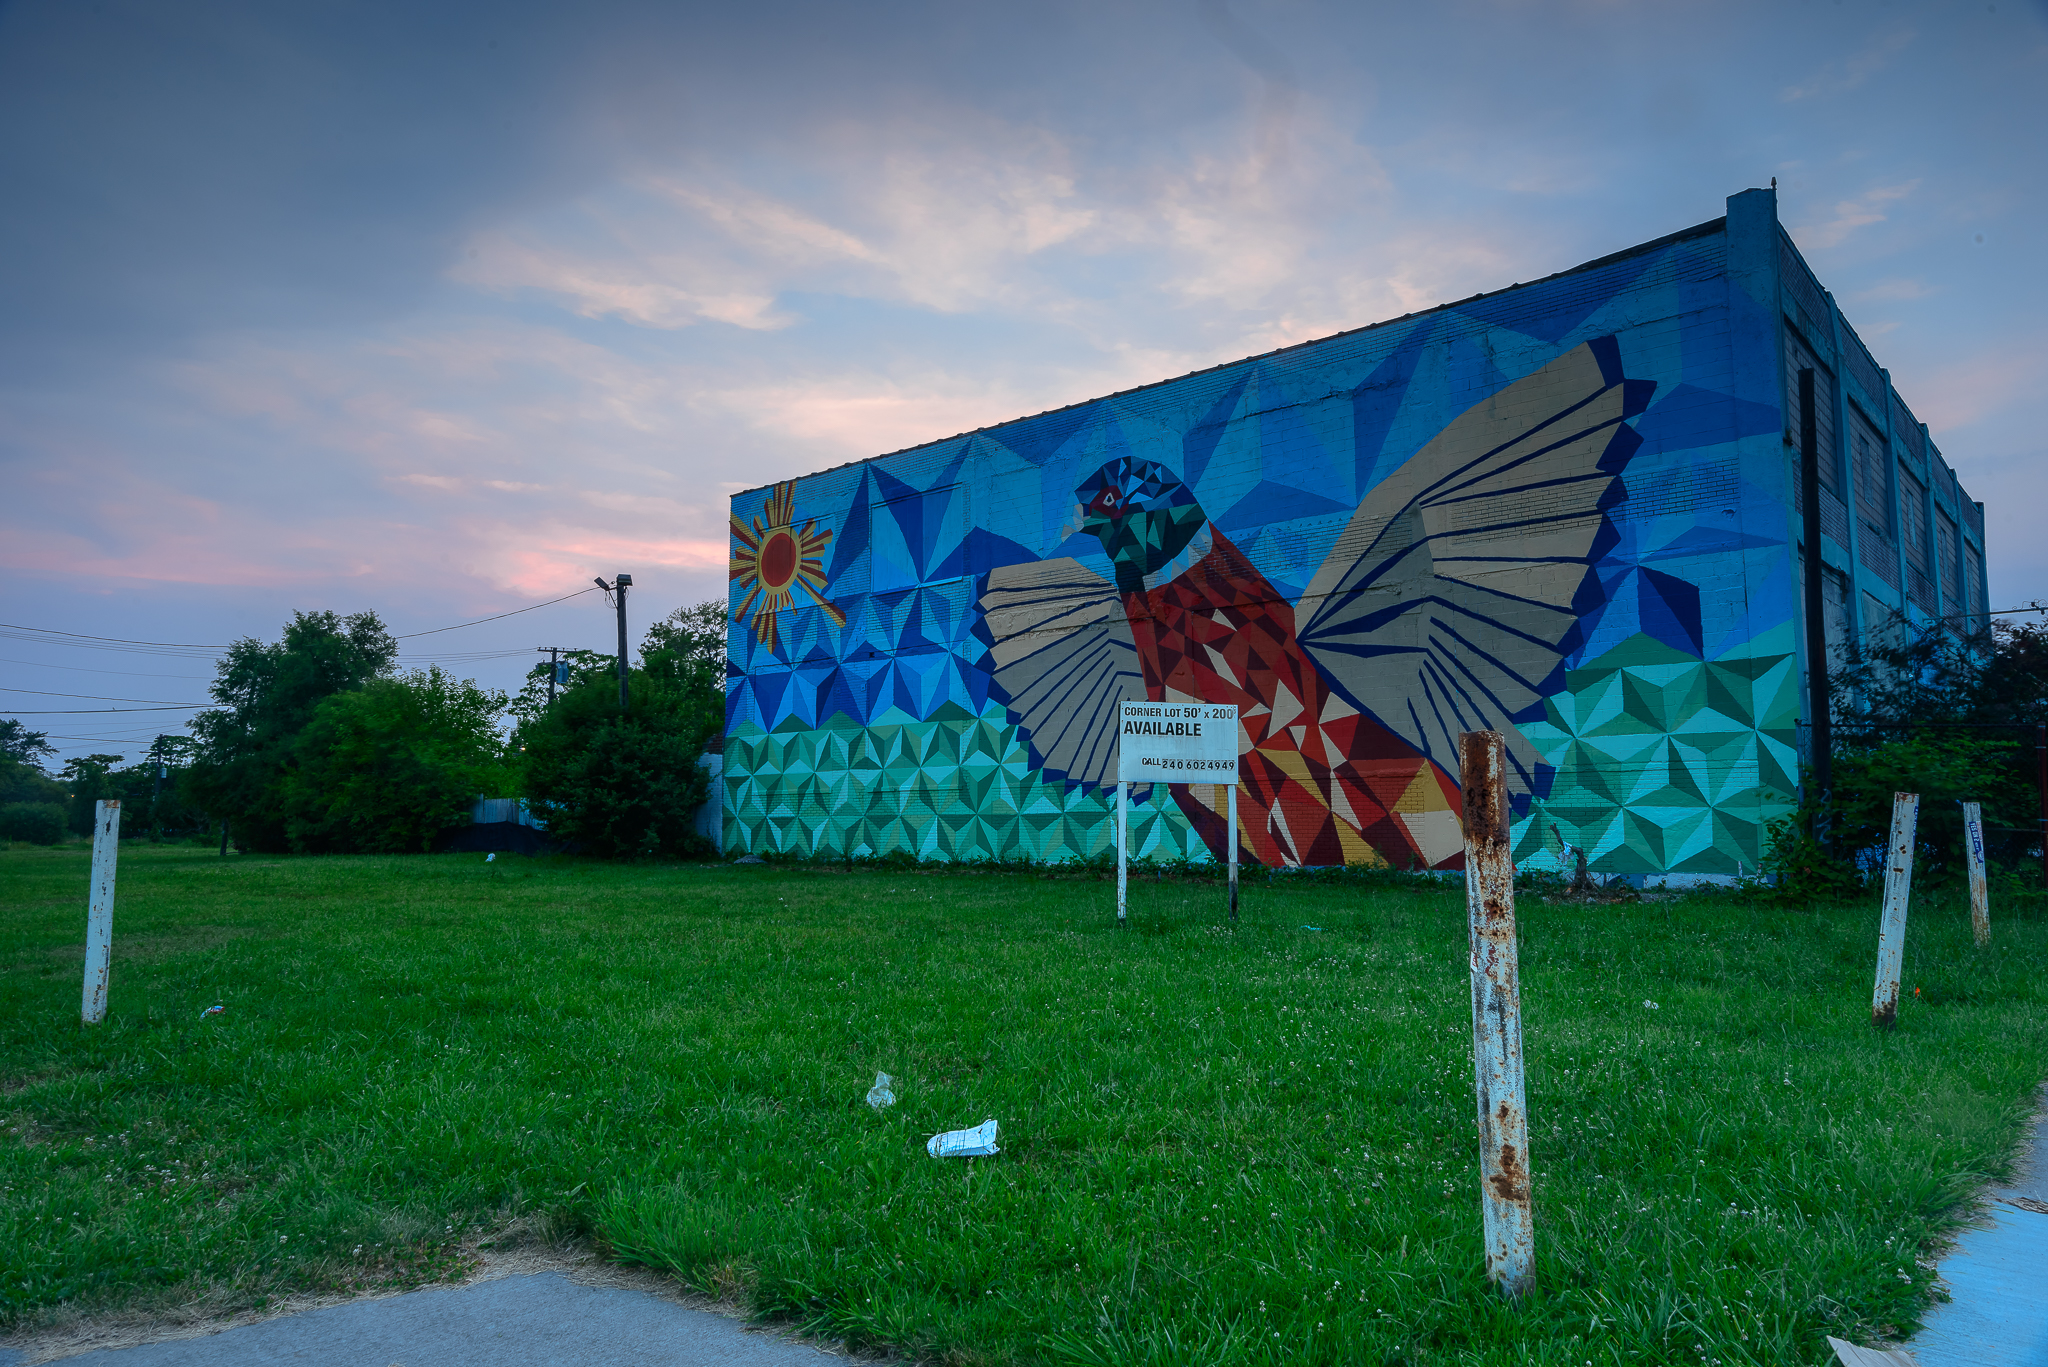  7/5/15.&nbsp; When a new mural pops up, you know.&nbsp; This one is a few blocks from our home.&nbsp; 